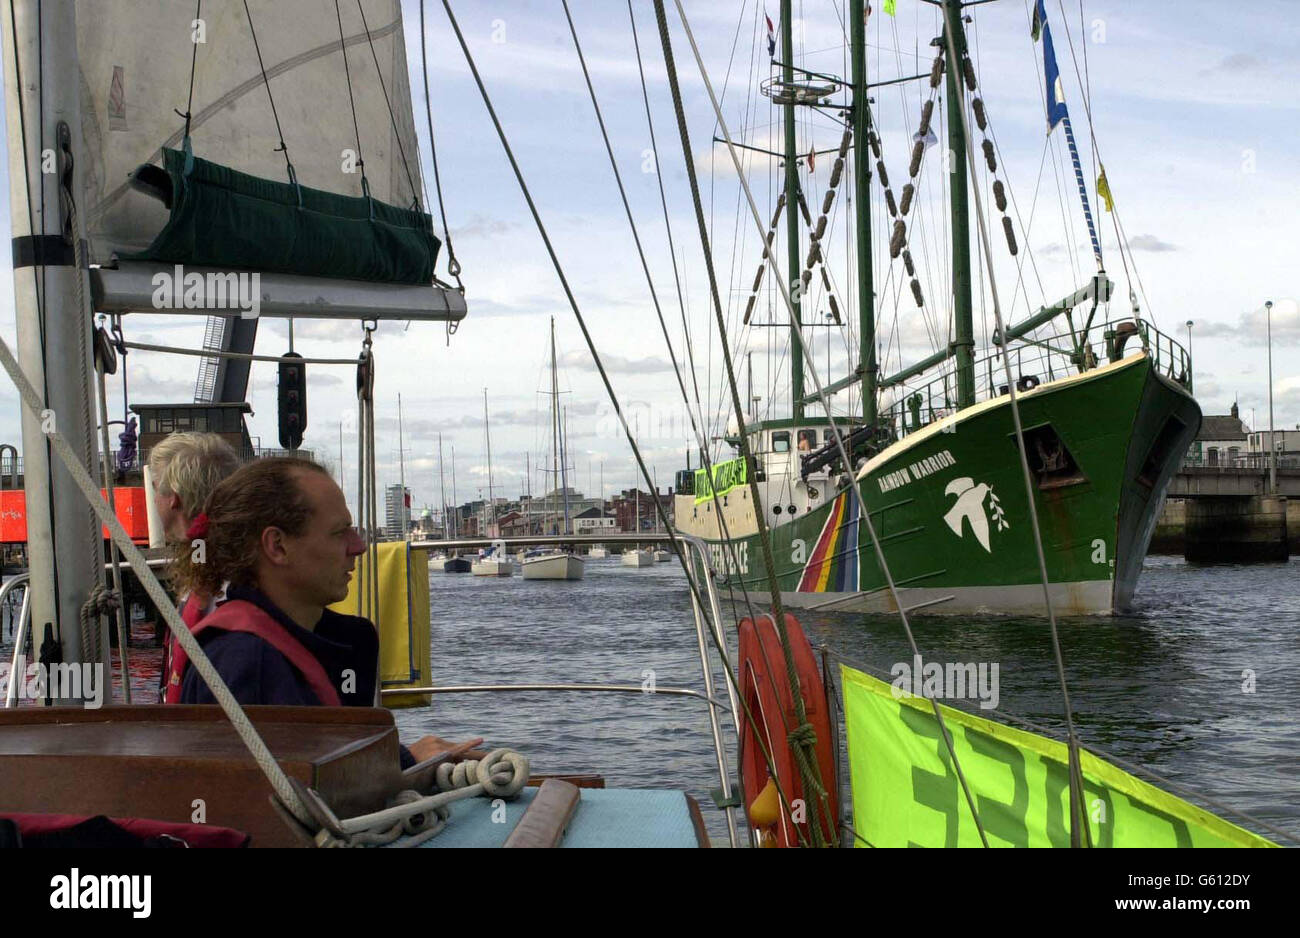 Keith White from Dublin watches Greenpeace's Rainbow Warrior (right) as it leads a flotilla of boats out of Dublin Harbour.The flotilla is protesting against a nuclear shipment bound for the Sellafield nuclear reprocessing plant in the UK, from Japan. A long line of celebrities including Bob Geldof and Ali Hewson, wife of U2 frontman Bono, have already campaigned against Sellafield and the nuclear shipment. Stock Photo